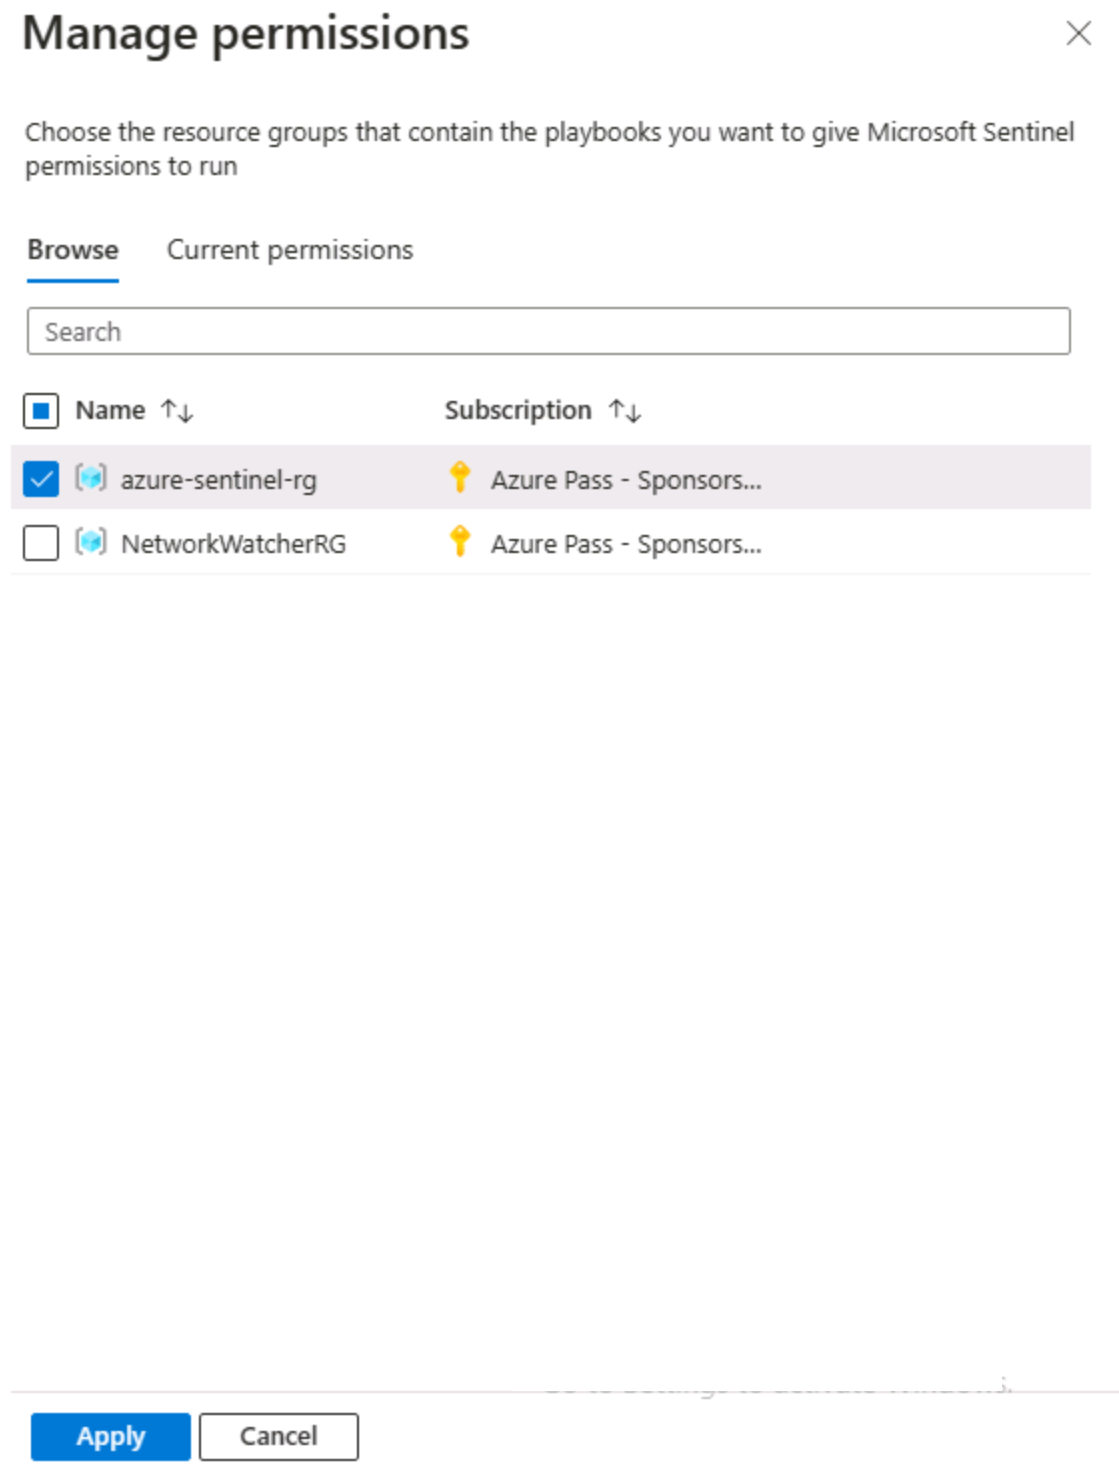 Screenshot of the Microsoft Sentinel Playbook Manage permissions page.